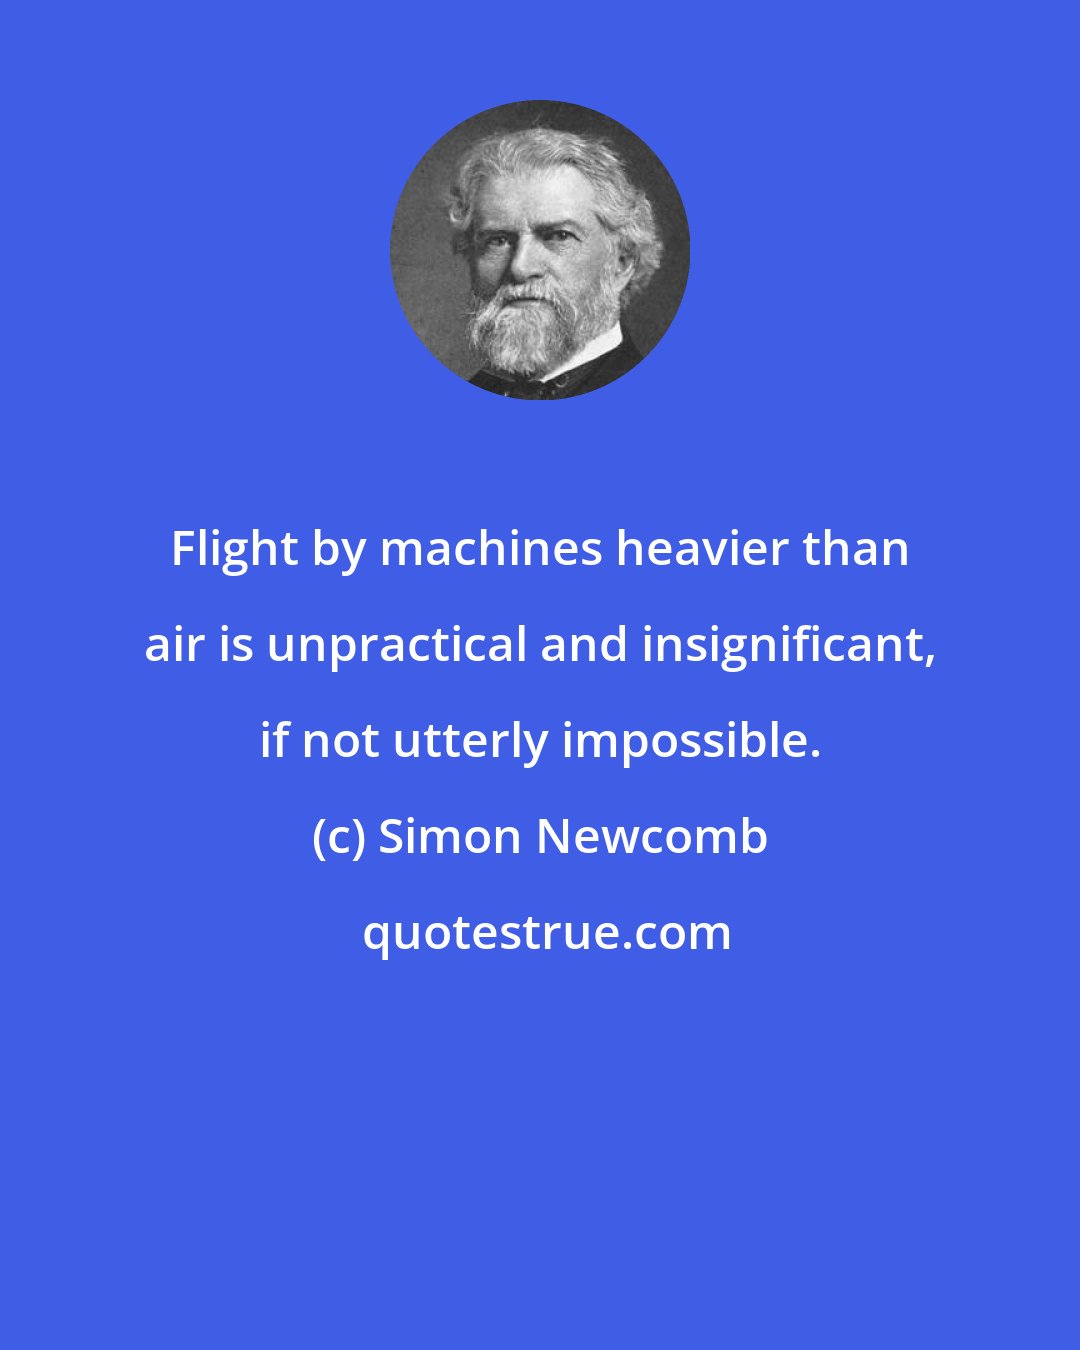 Simon Newcomb: Flight by machines heavier than air is unpractical and insignificant, if not utterly impossible.